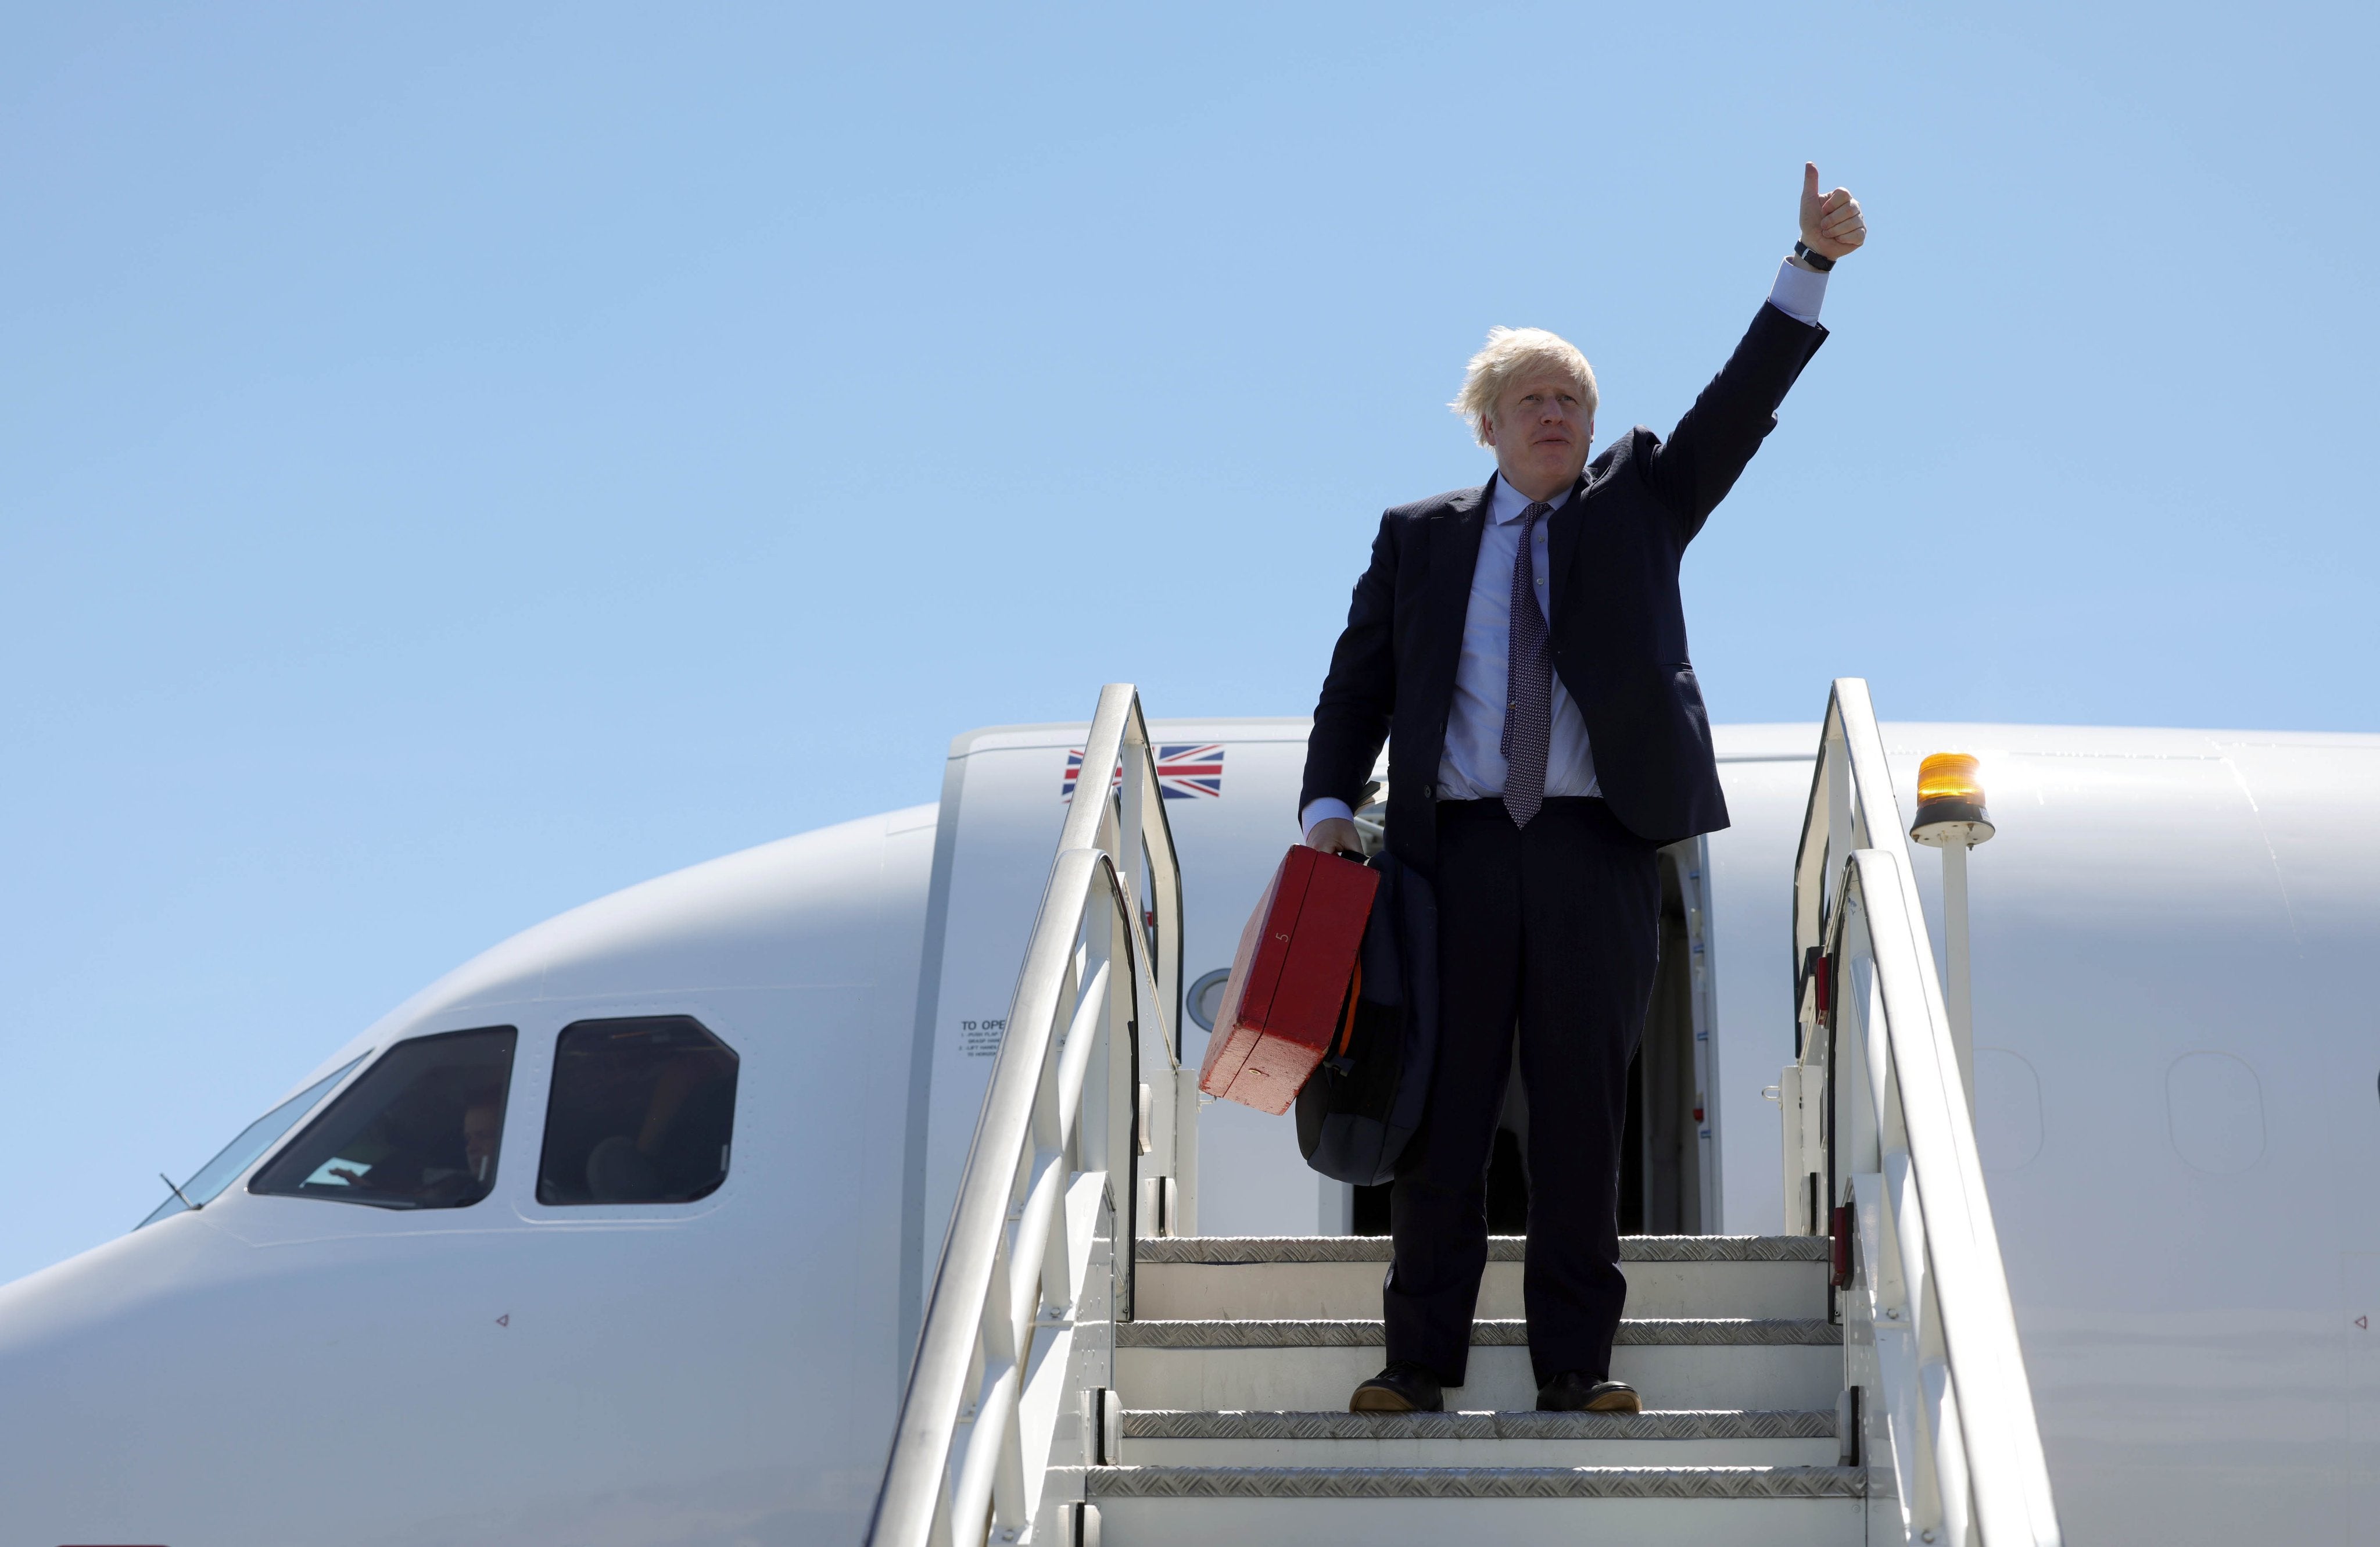 ‘“If you attack my arrival by plane,” Johnson huffed, “I respectfully point out that the UK is actually in the lead in developing sustainable aviation fuel”’